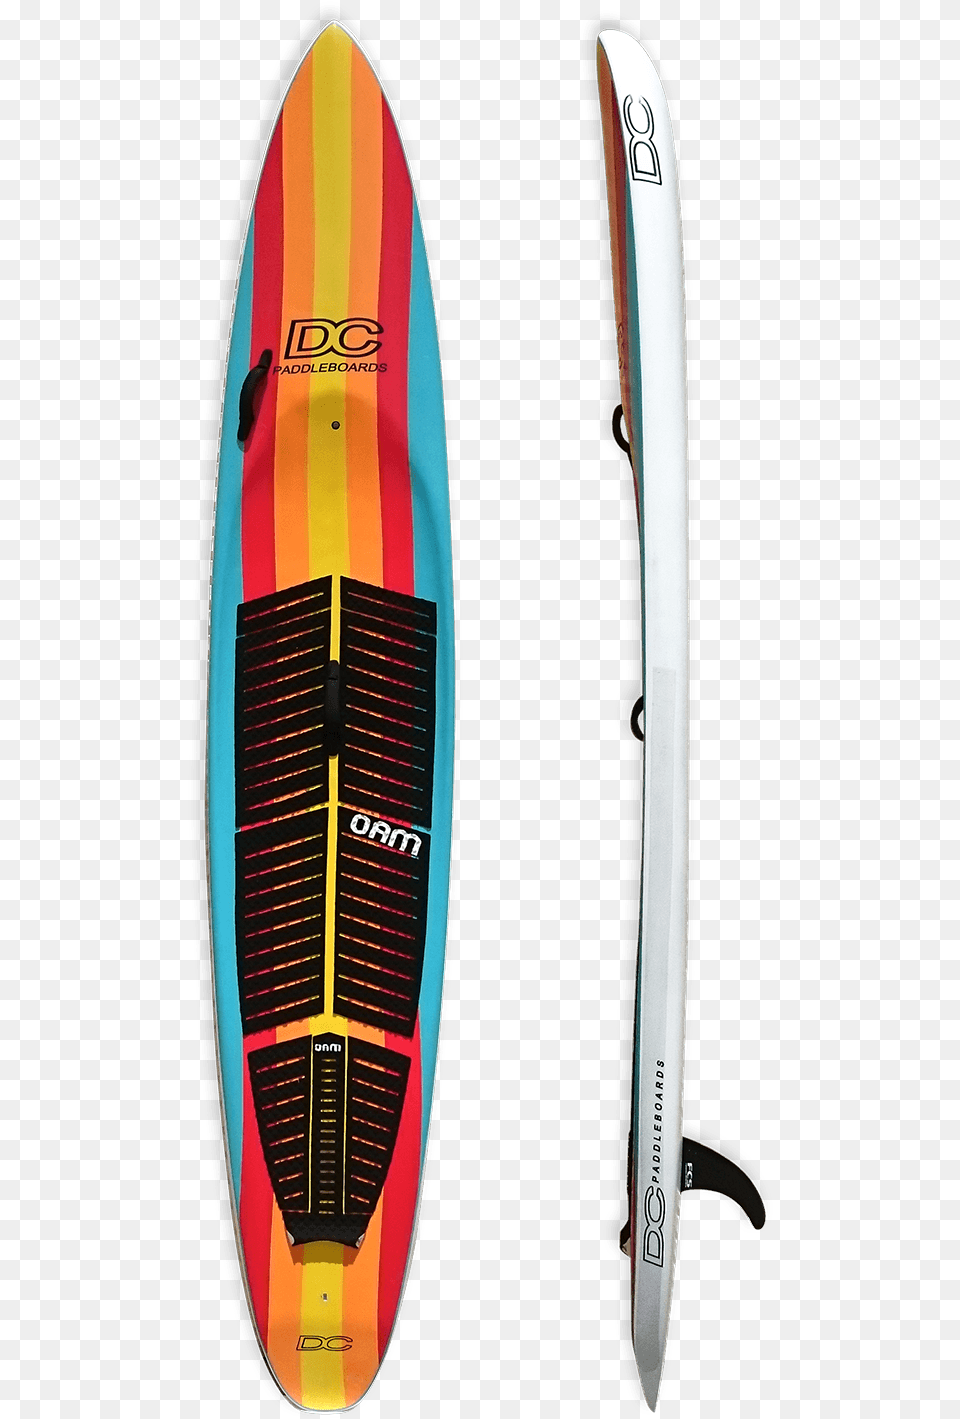 Rainbow Paddleboard Surfboard, Sea Waves, Water, Surfing, Leisure Activities Png Image